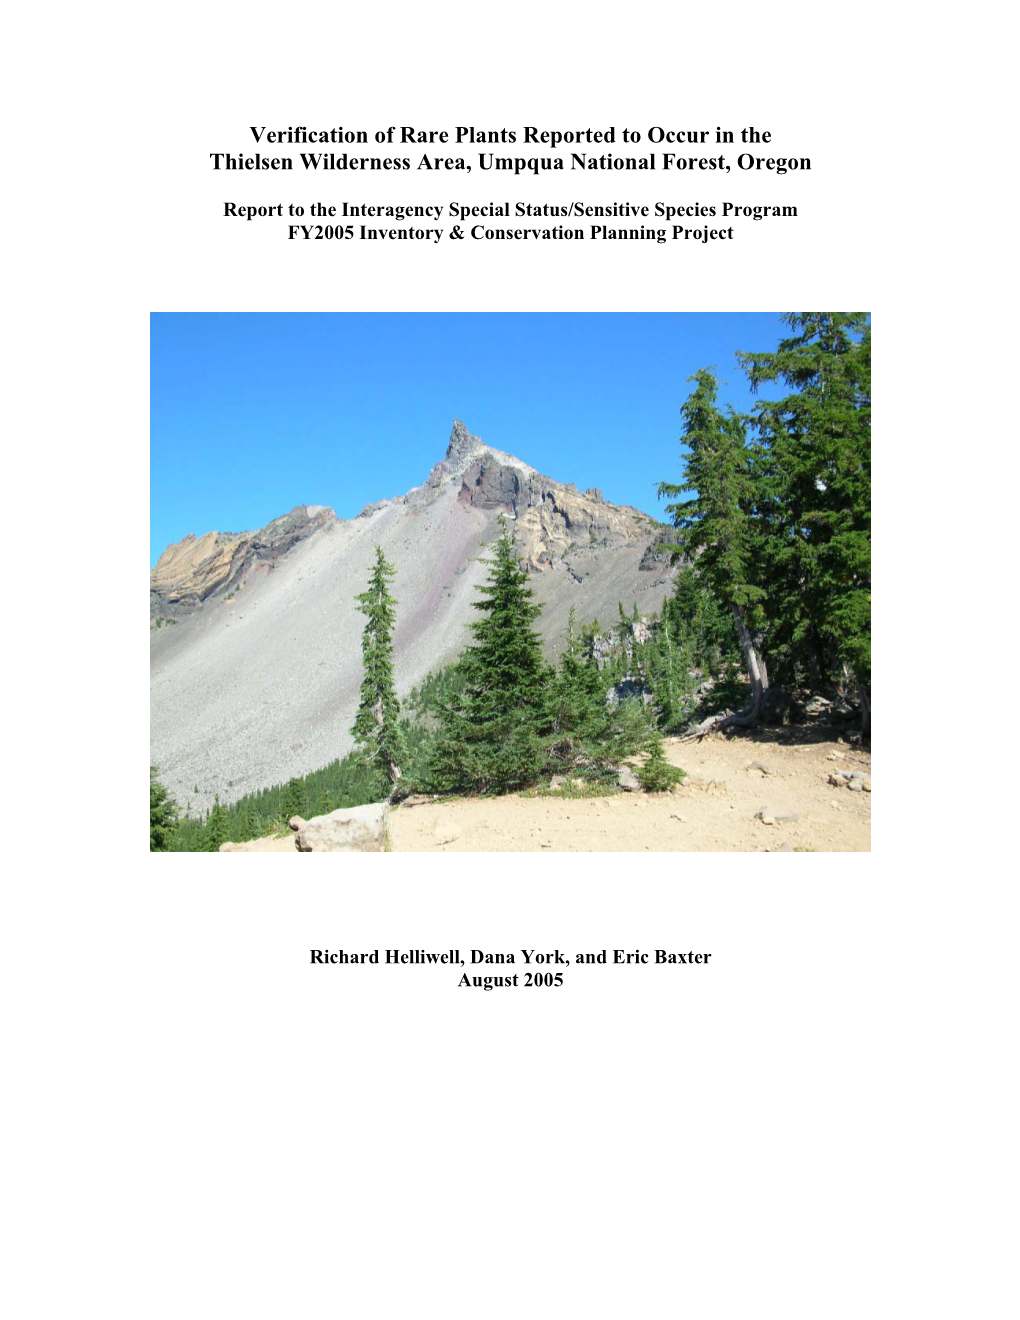 Verification of Rare Plants Reported to Occur in the Thielsen Wilderness Area, Umpqua National Forest, Oregon